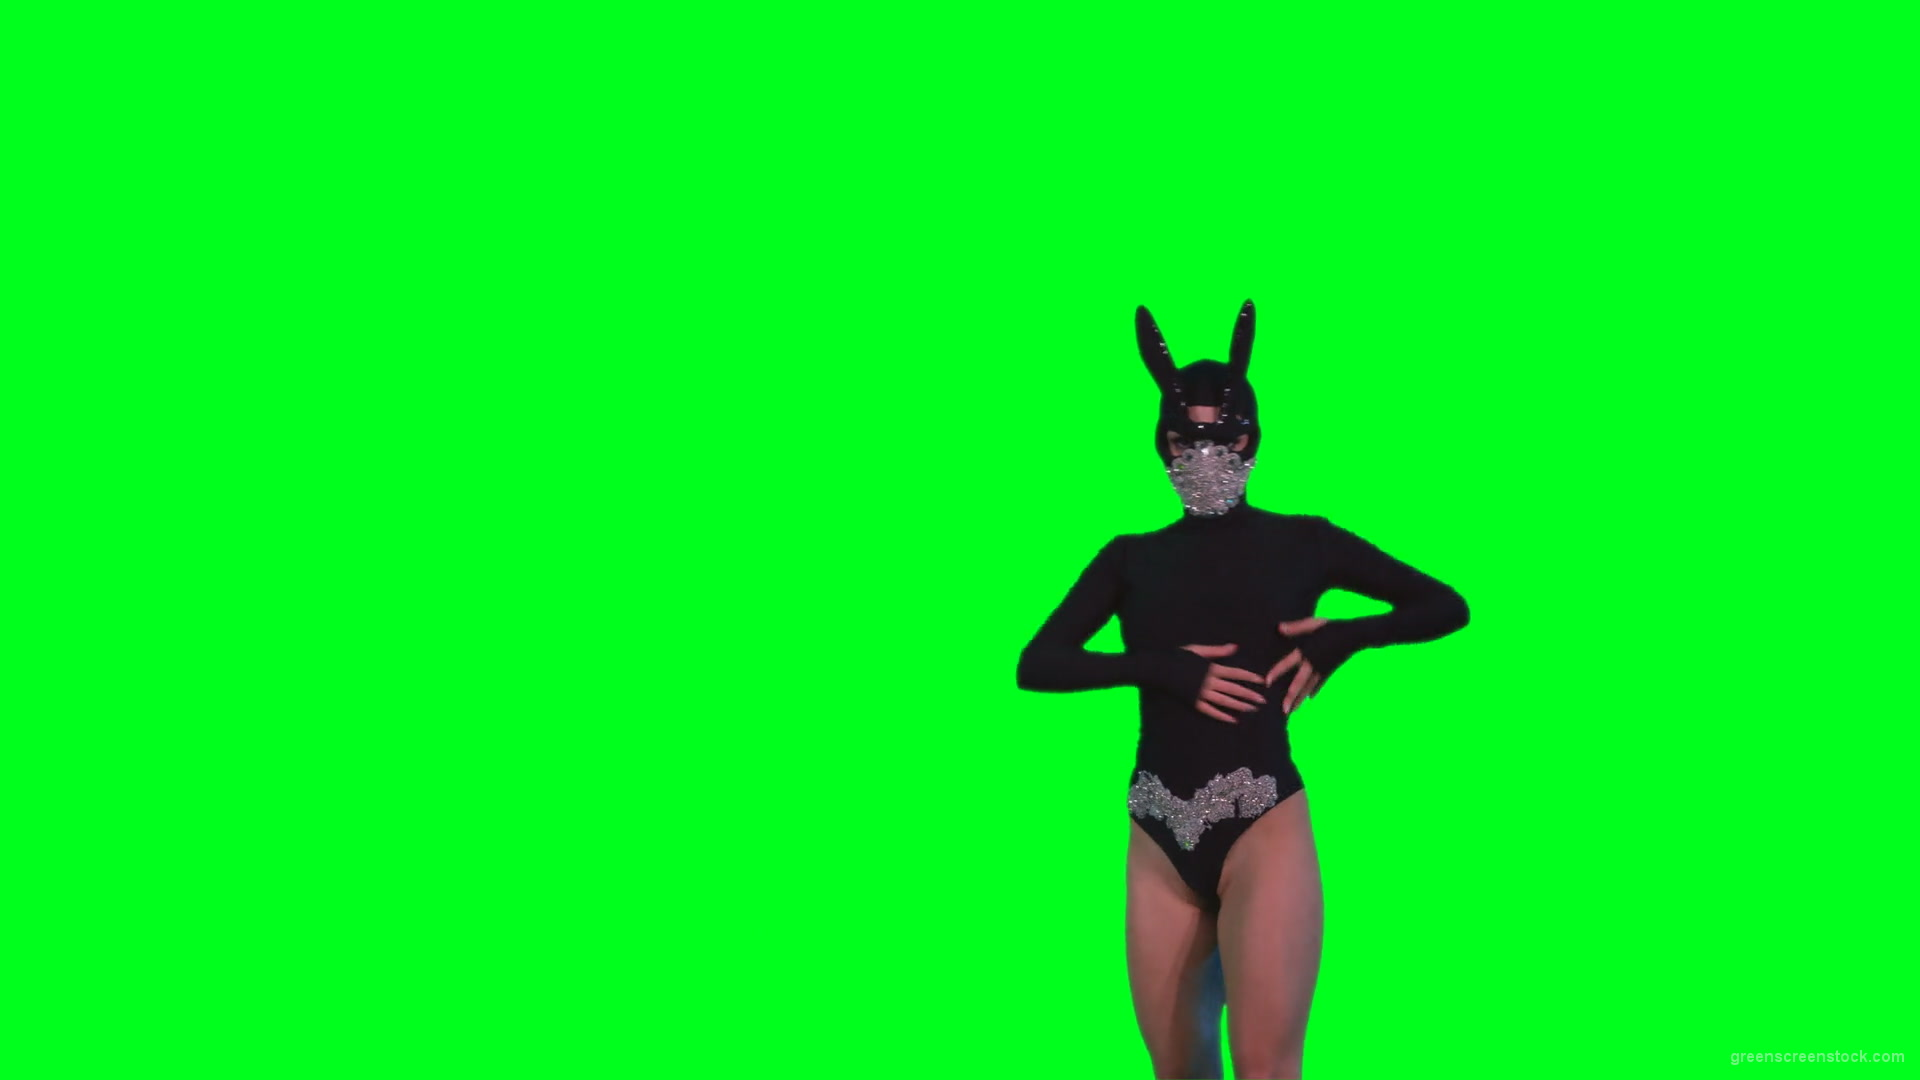 Sexy-bunny-girl-dance-performs-in-rabbit-costume-on-green-screen-4K-Video-Footage-1920_004 Green Screen Stock